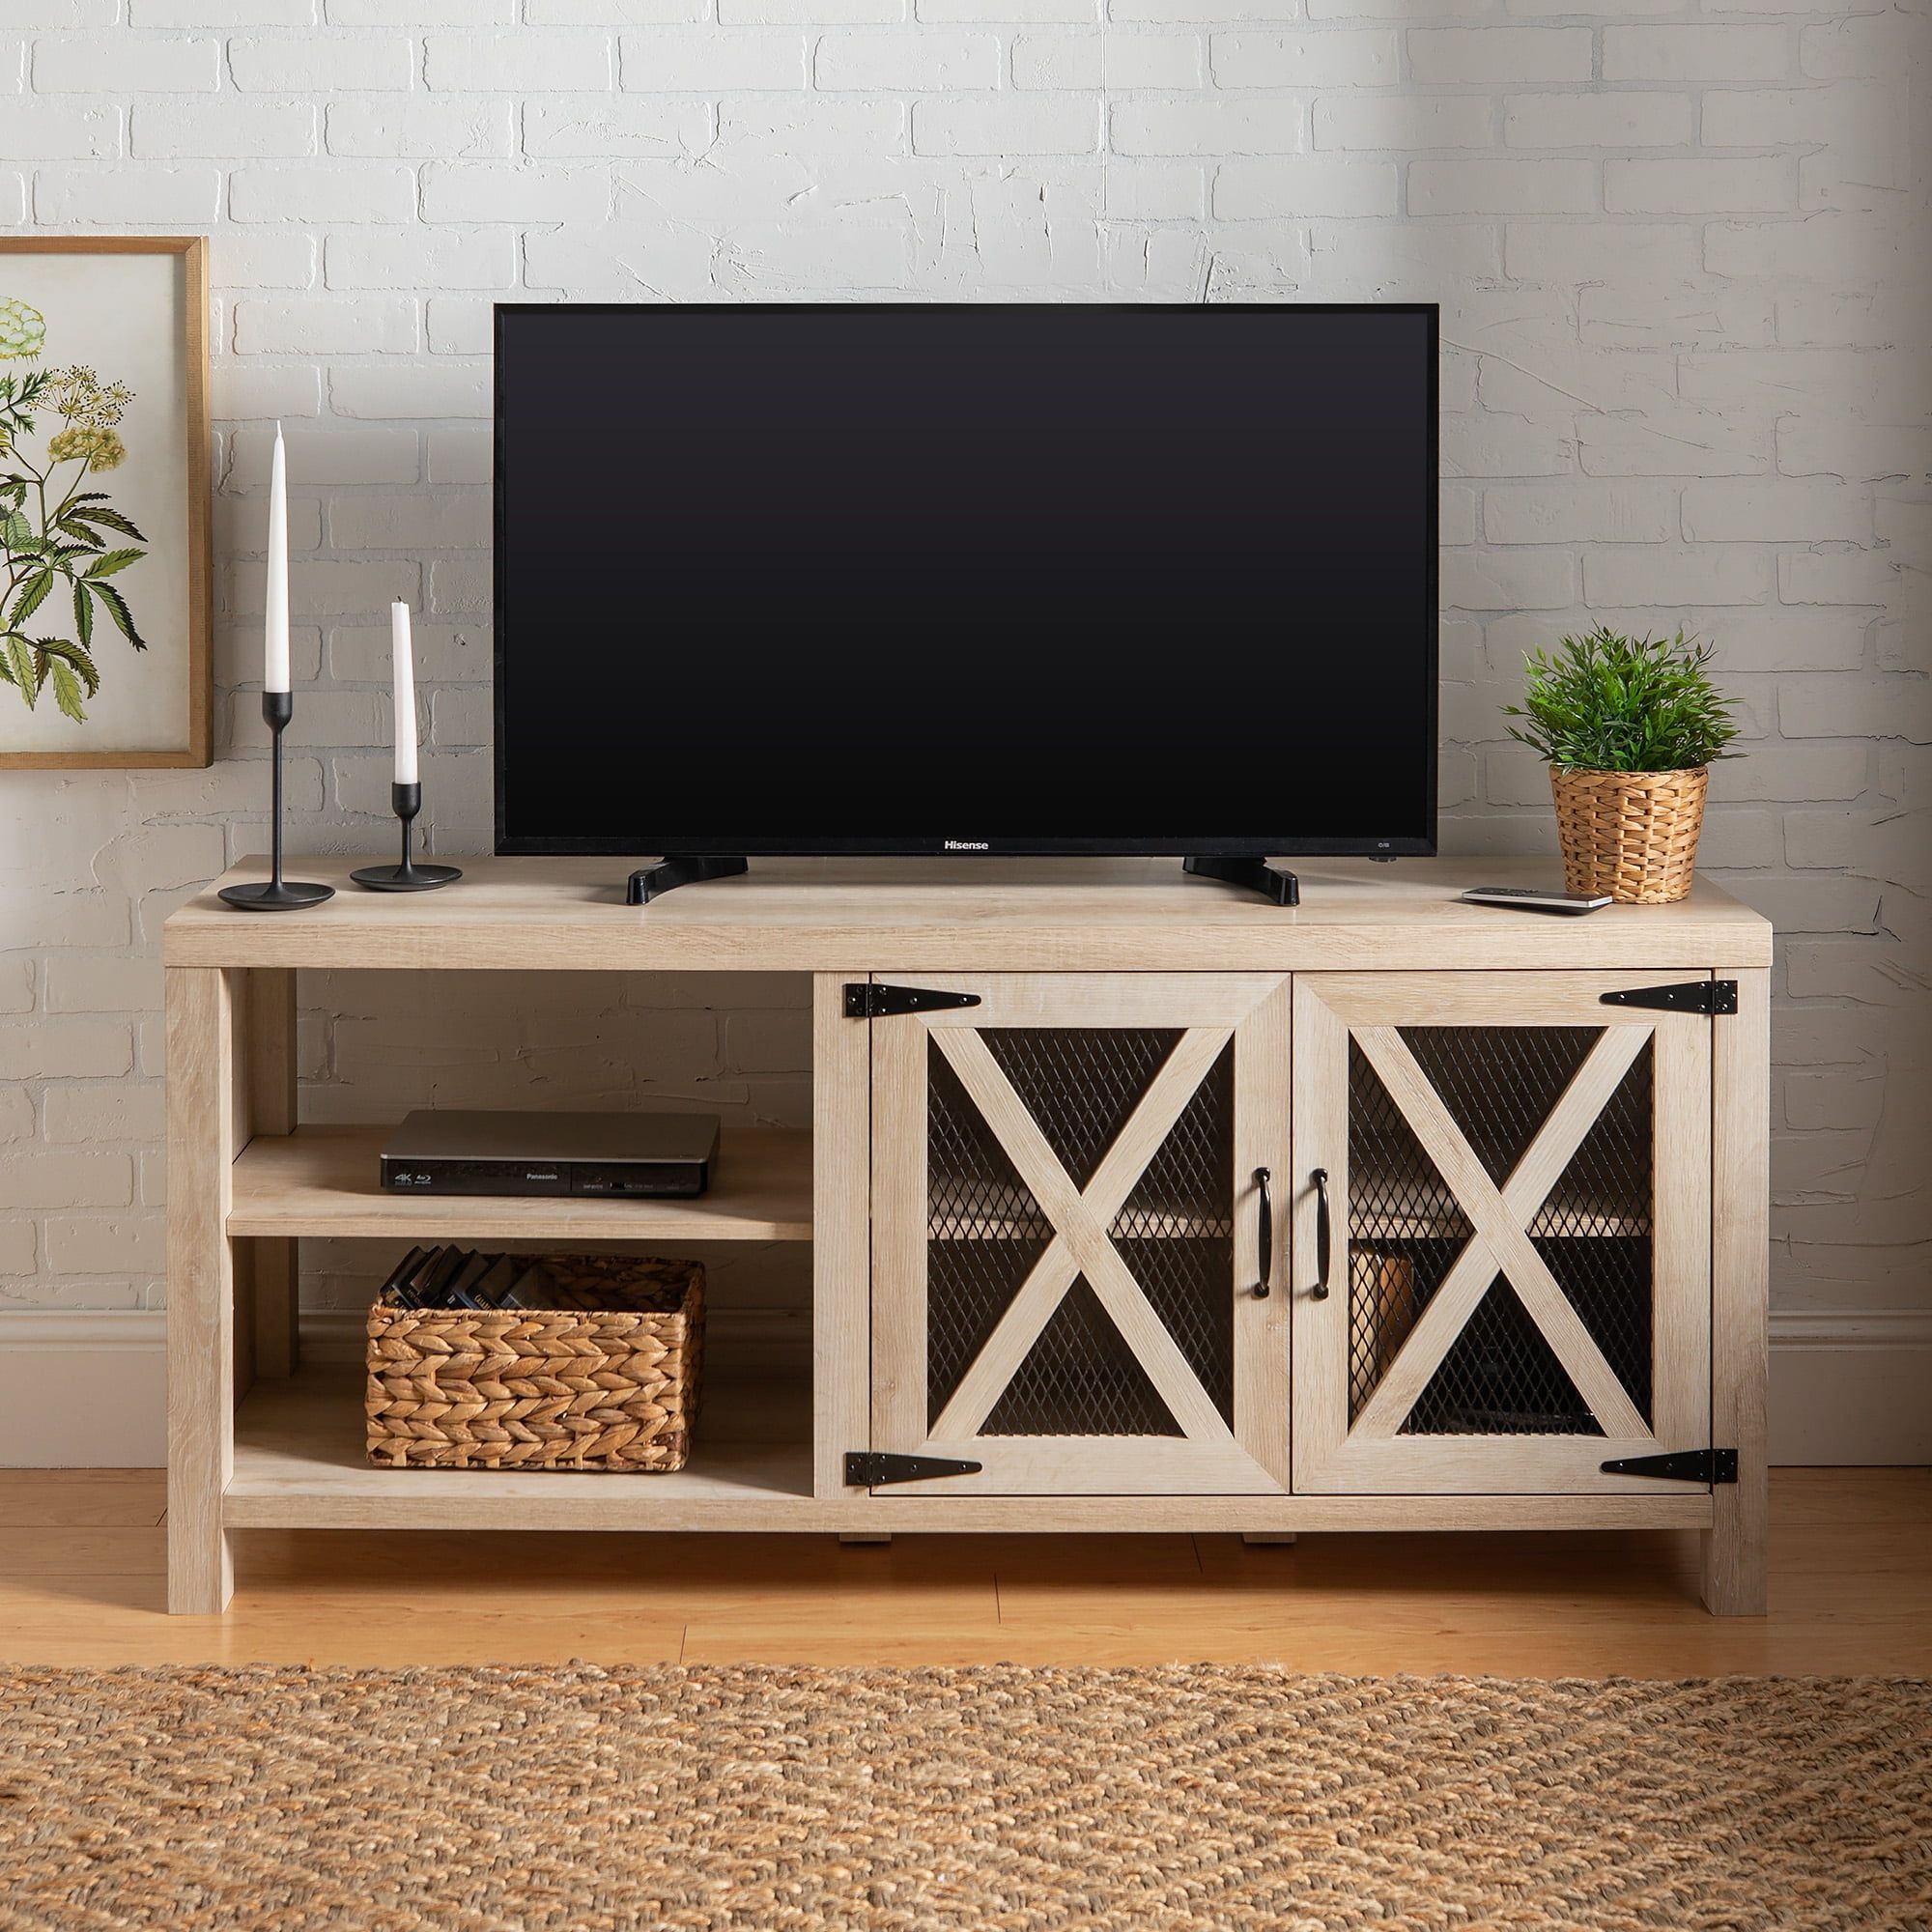 Manor Park Industrial Farmhouse Tv Stand For Tvs Up To 64" – White Oak With Farmhouse Tv Stands (Gallery 3 of 20)